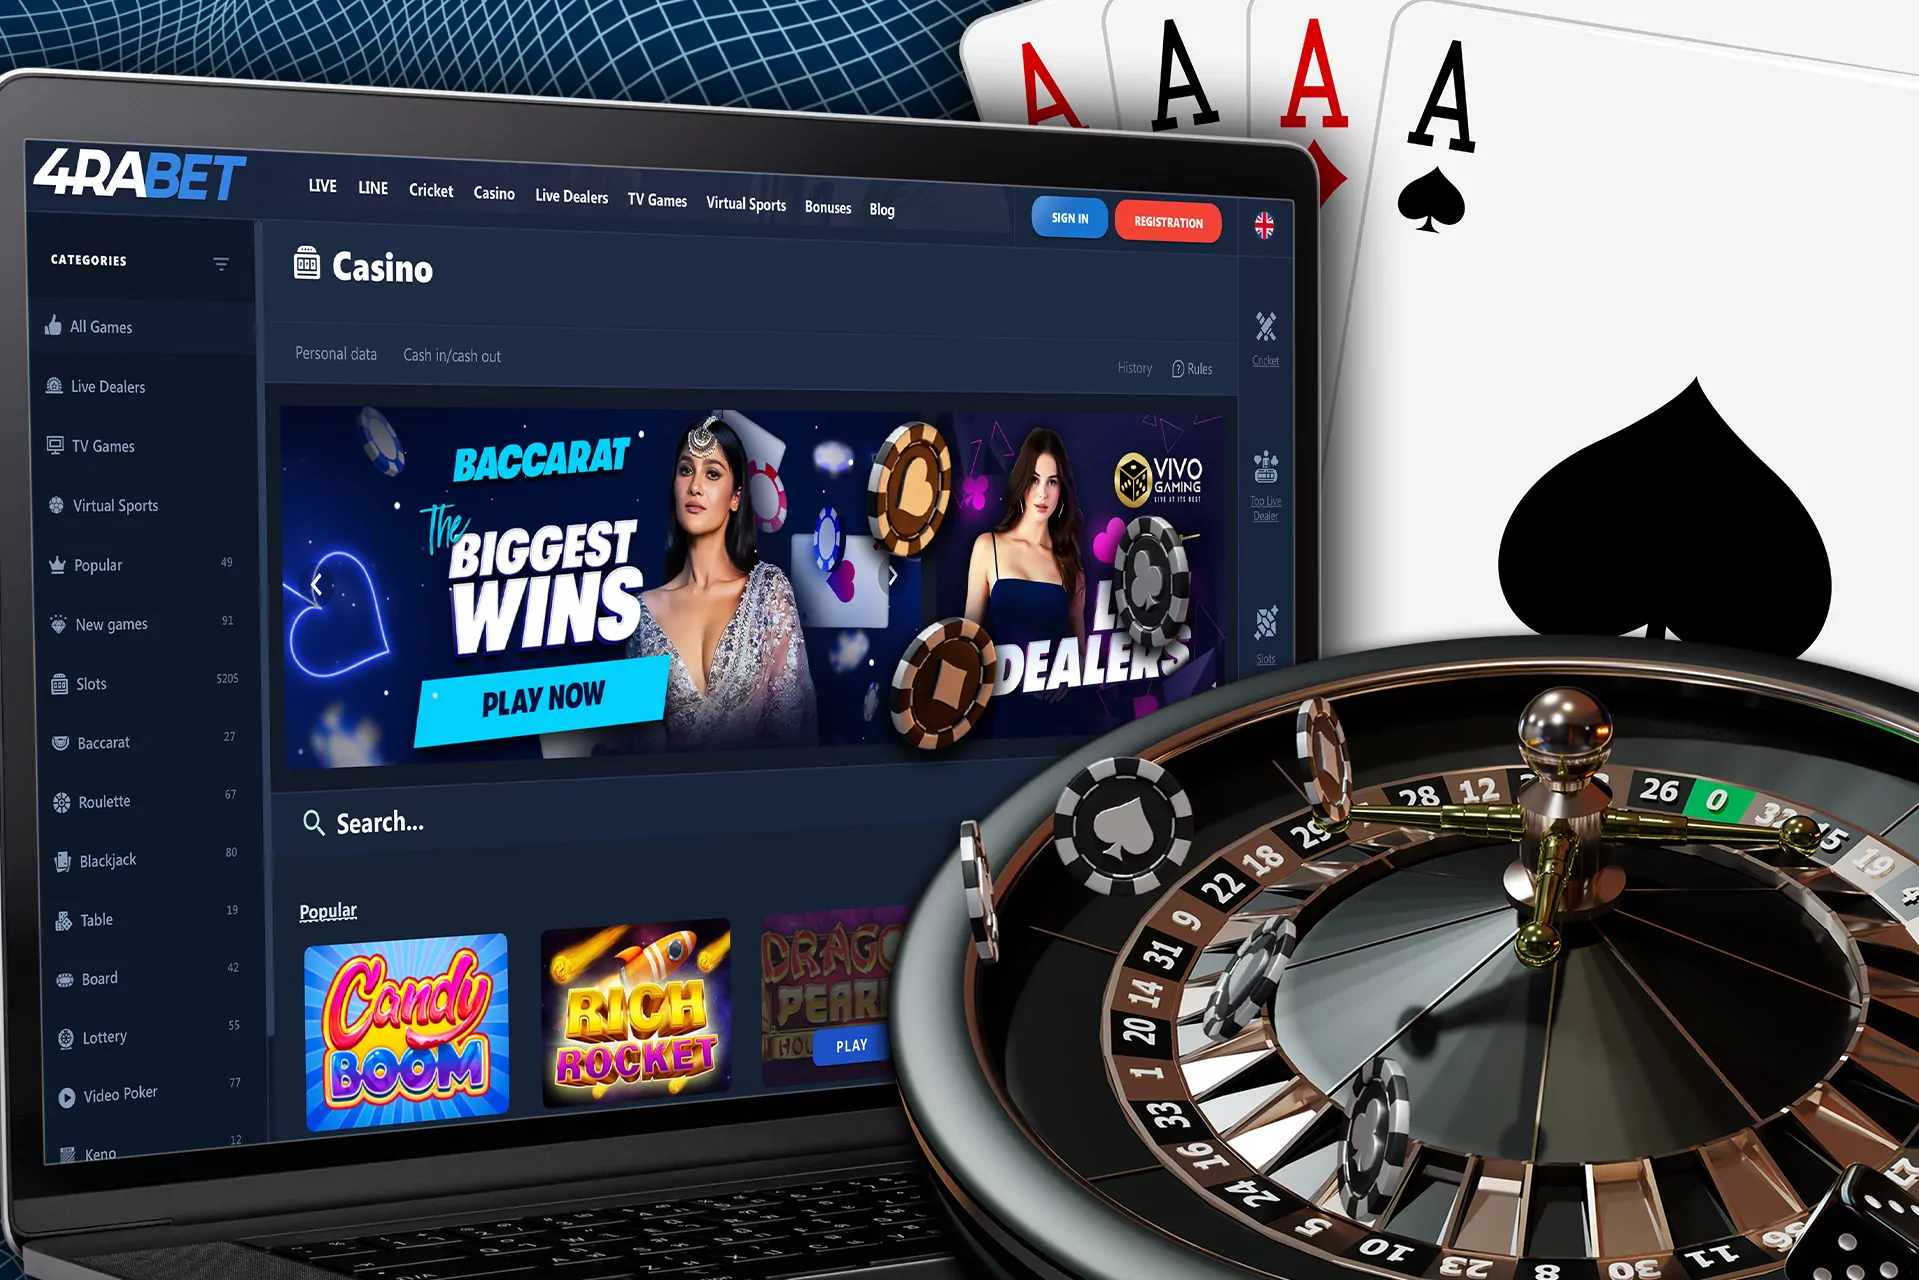 Play online casino games right on the 4rabet website.